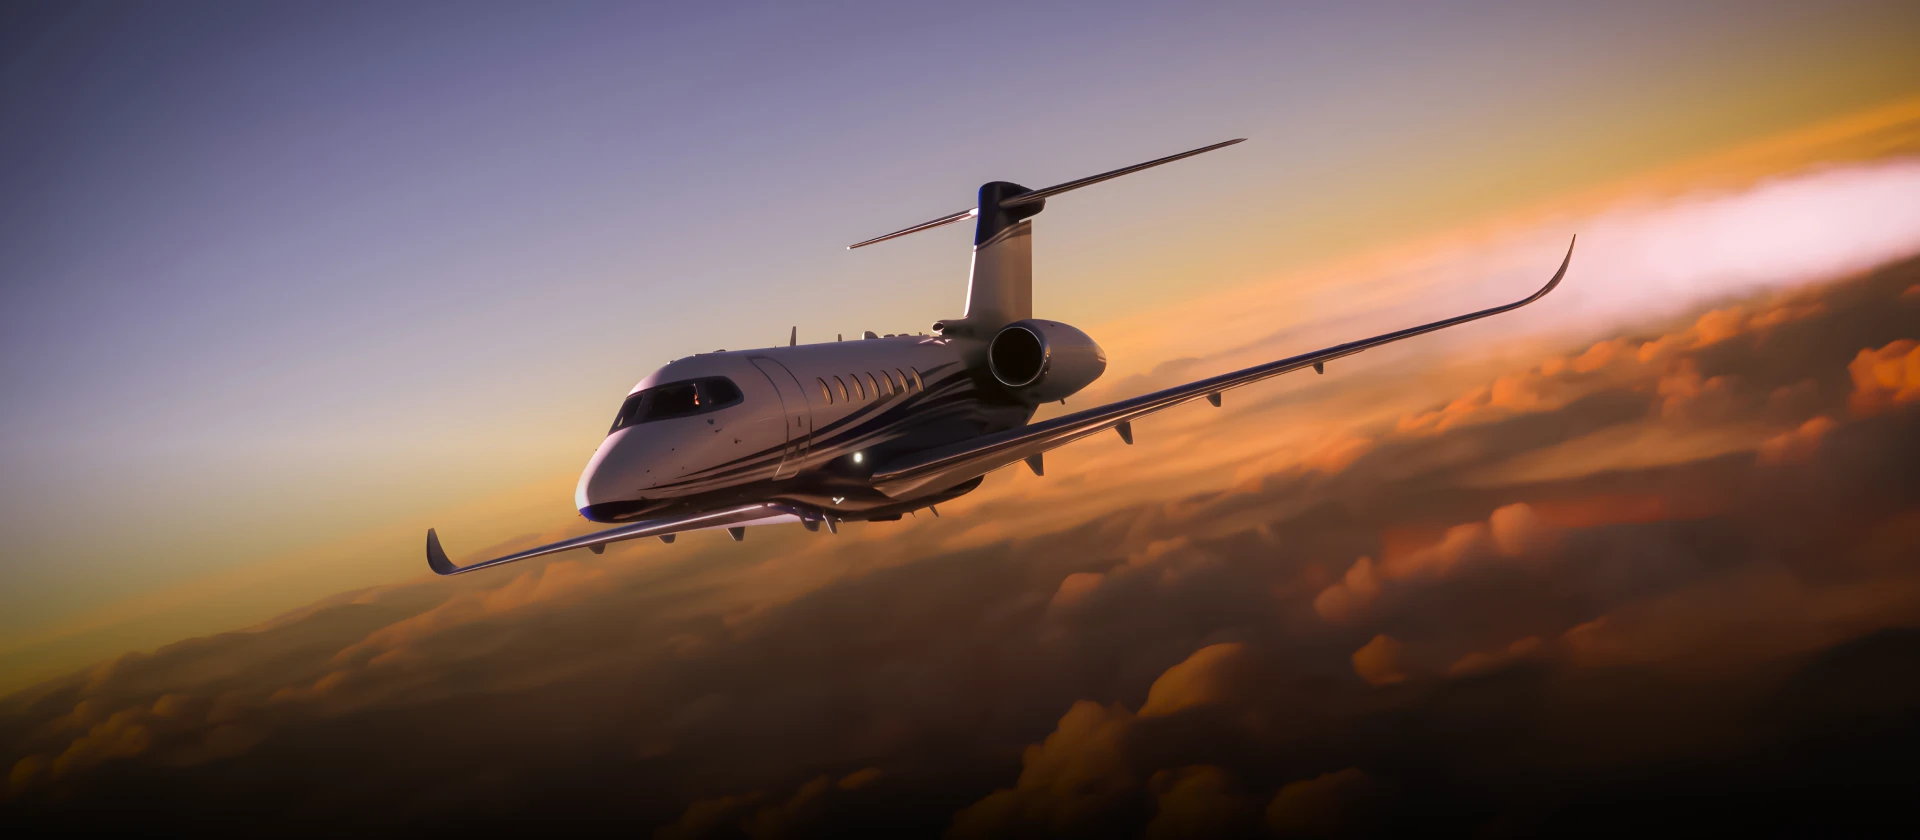 Contact Ocean Jets - A Private Jet Charter Company in USA providing Private Jet Services